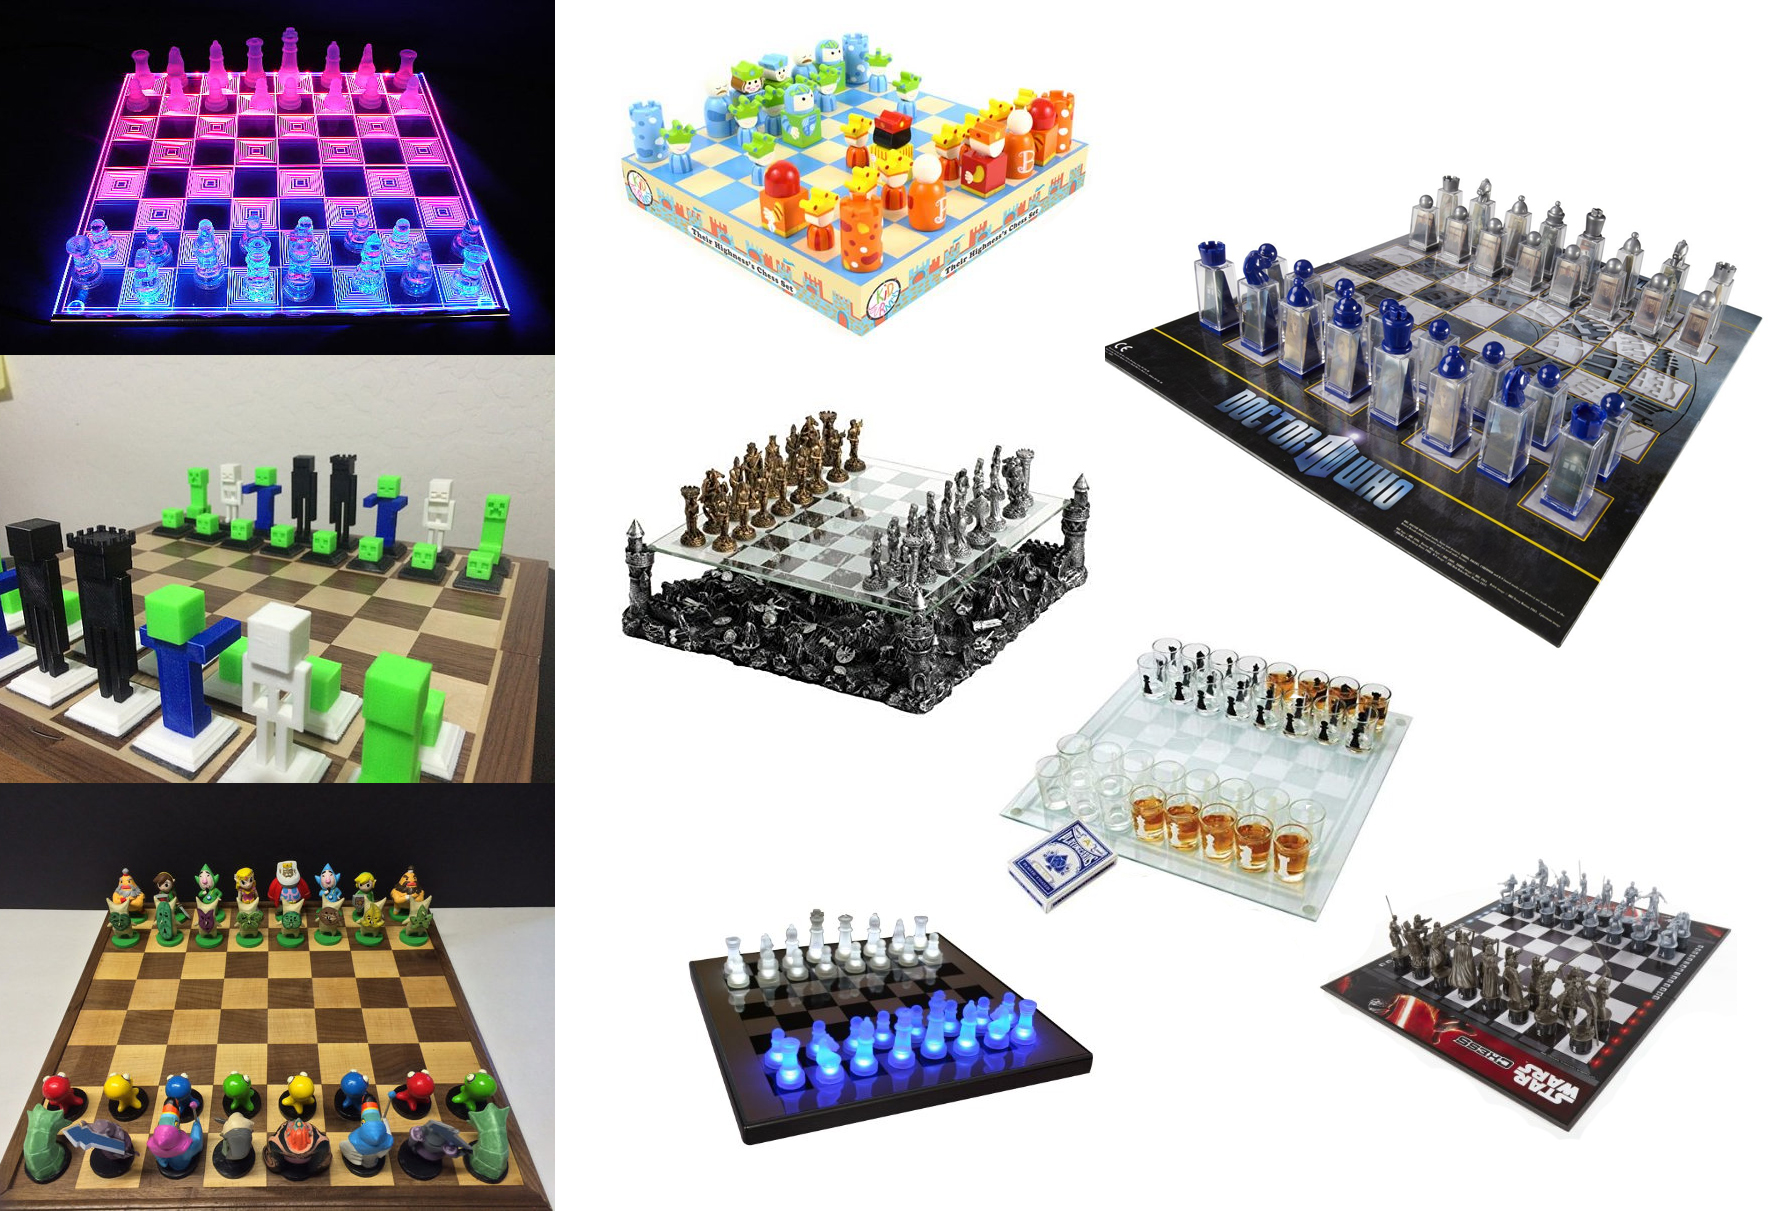 25 Cool Chess Sets